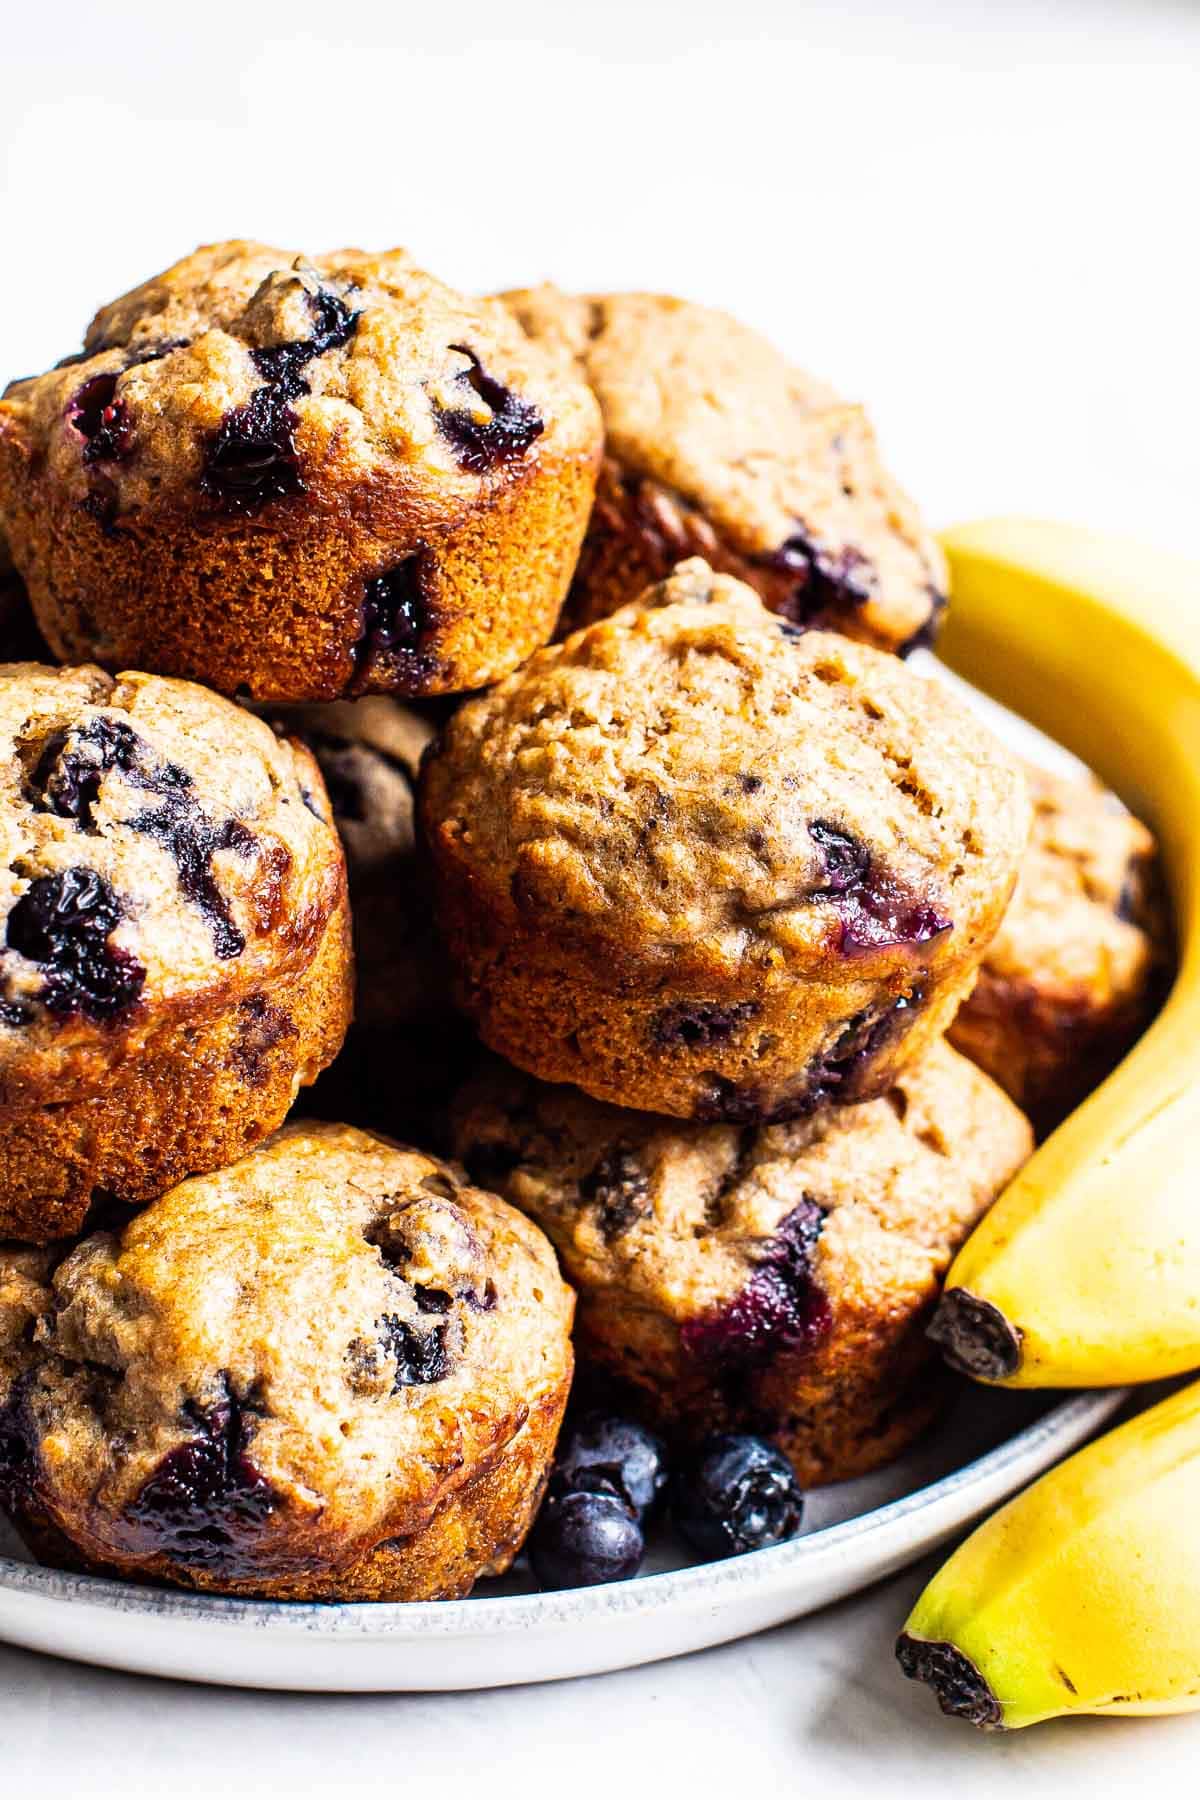 Healthy blueberry banana muffins stacked on a plate with some bananas.